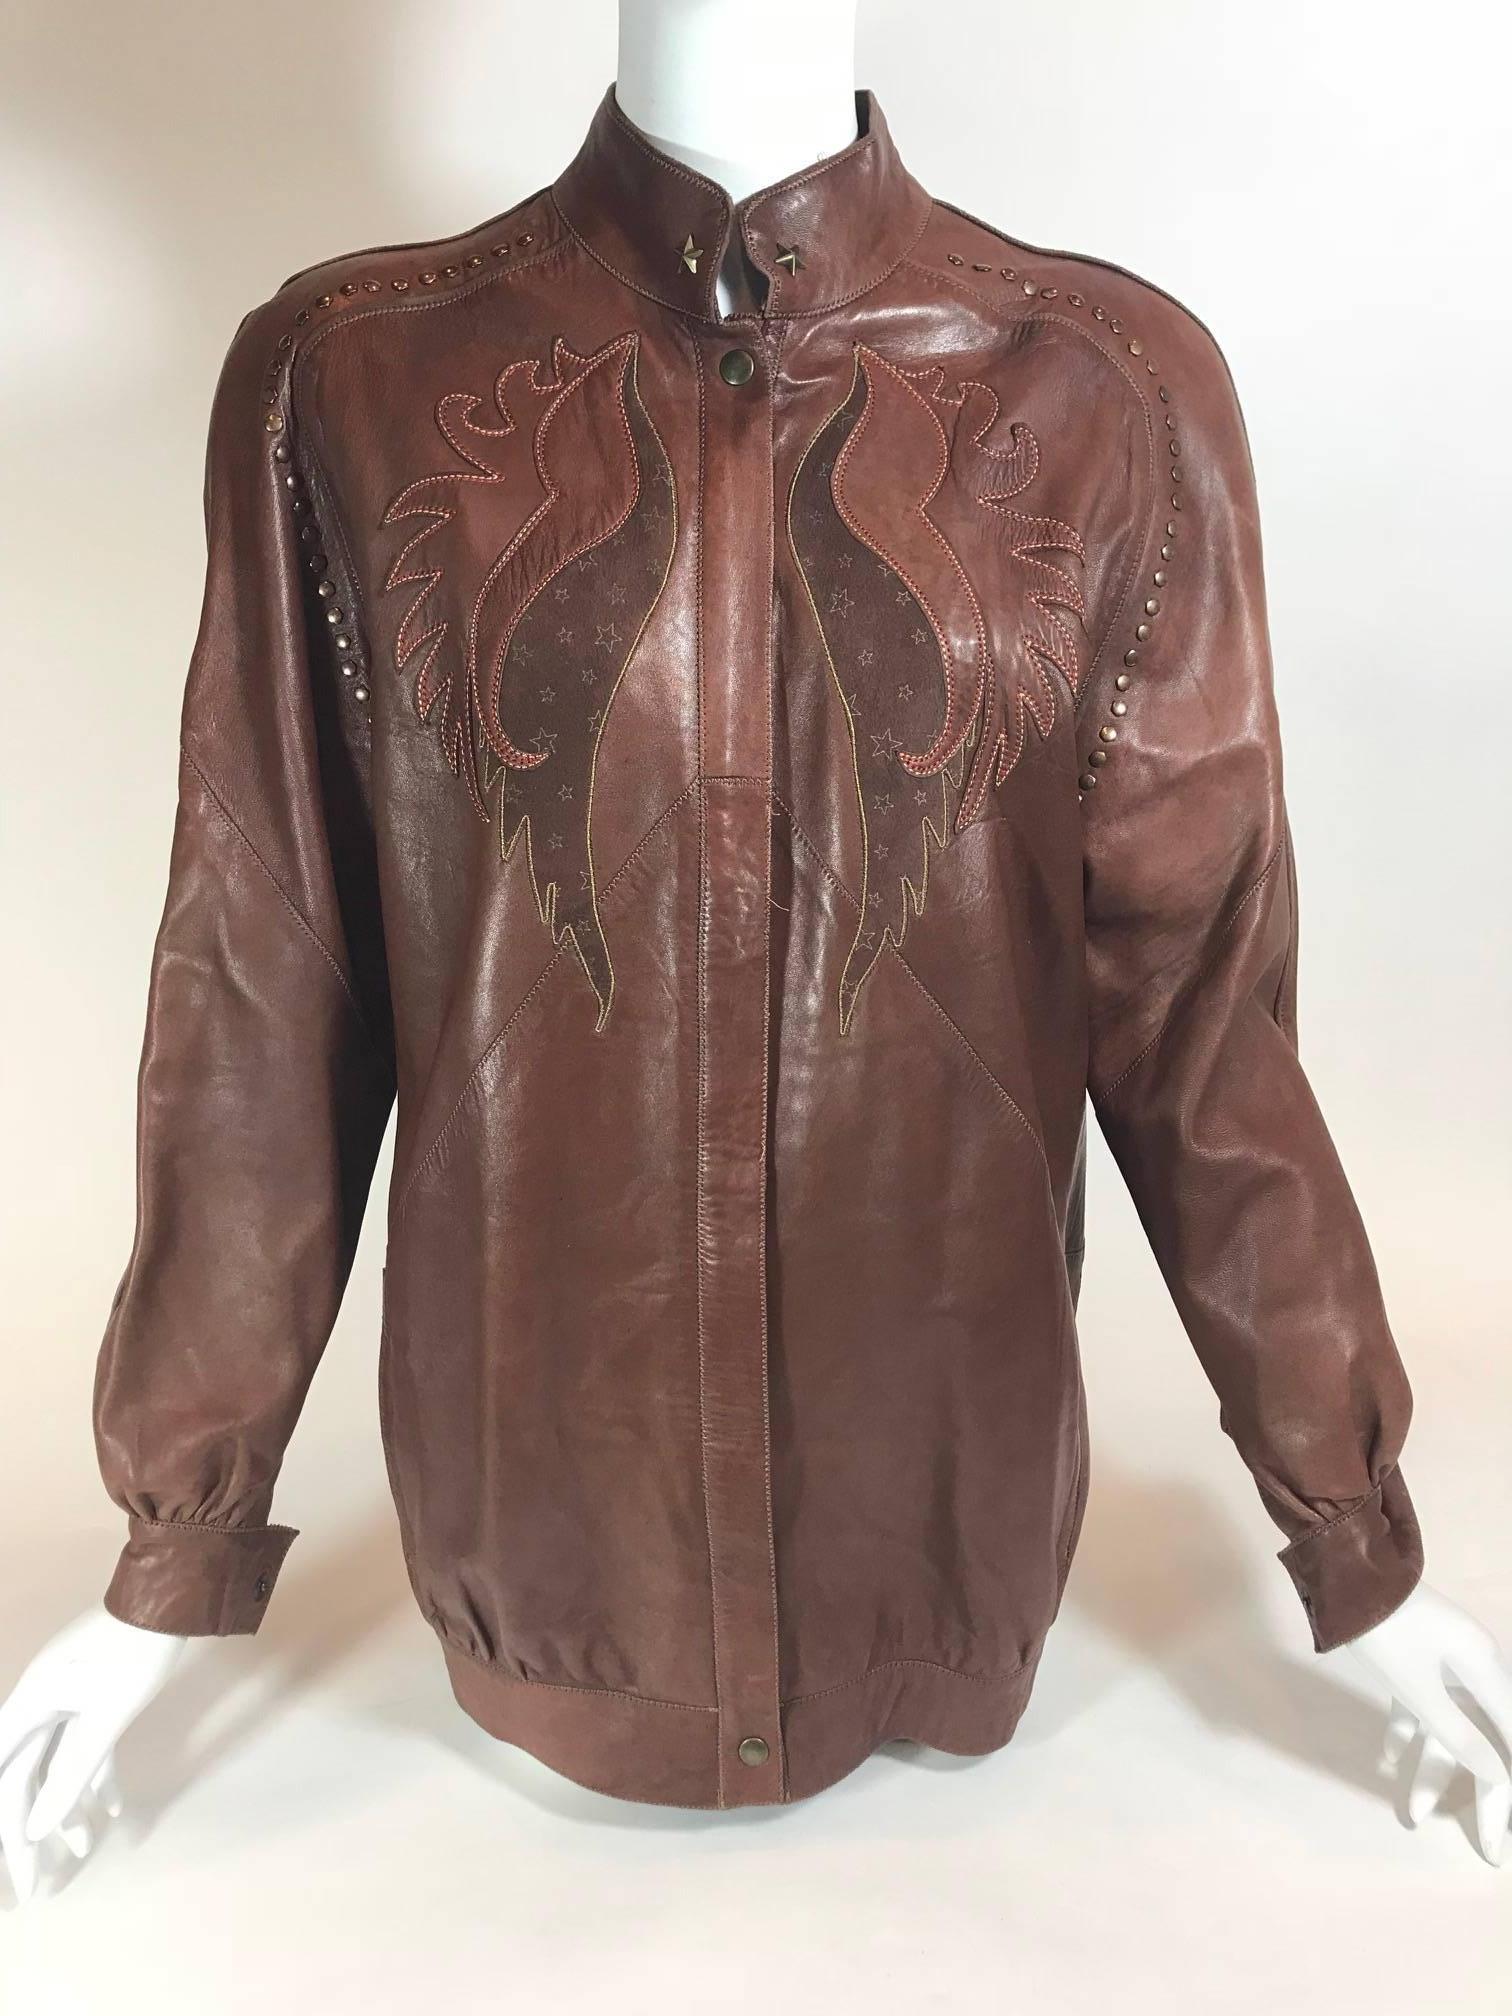 Brown leather. Bronze hardware. Zipper closure with single button at top and bottom. Front design featuring star pattern and tan and red stitching. Mock neck collar with star stud on each side. Flat stud detail along shoulder and arm seam. Star and